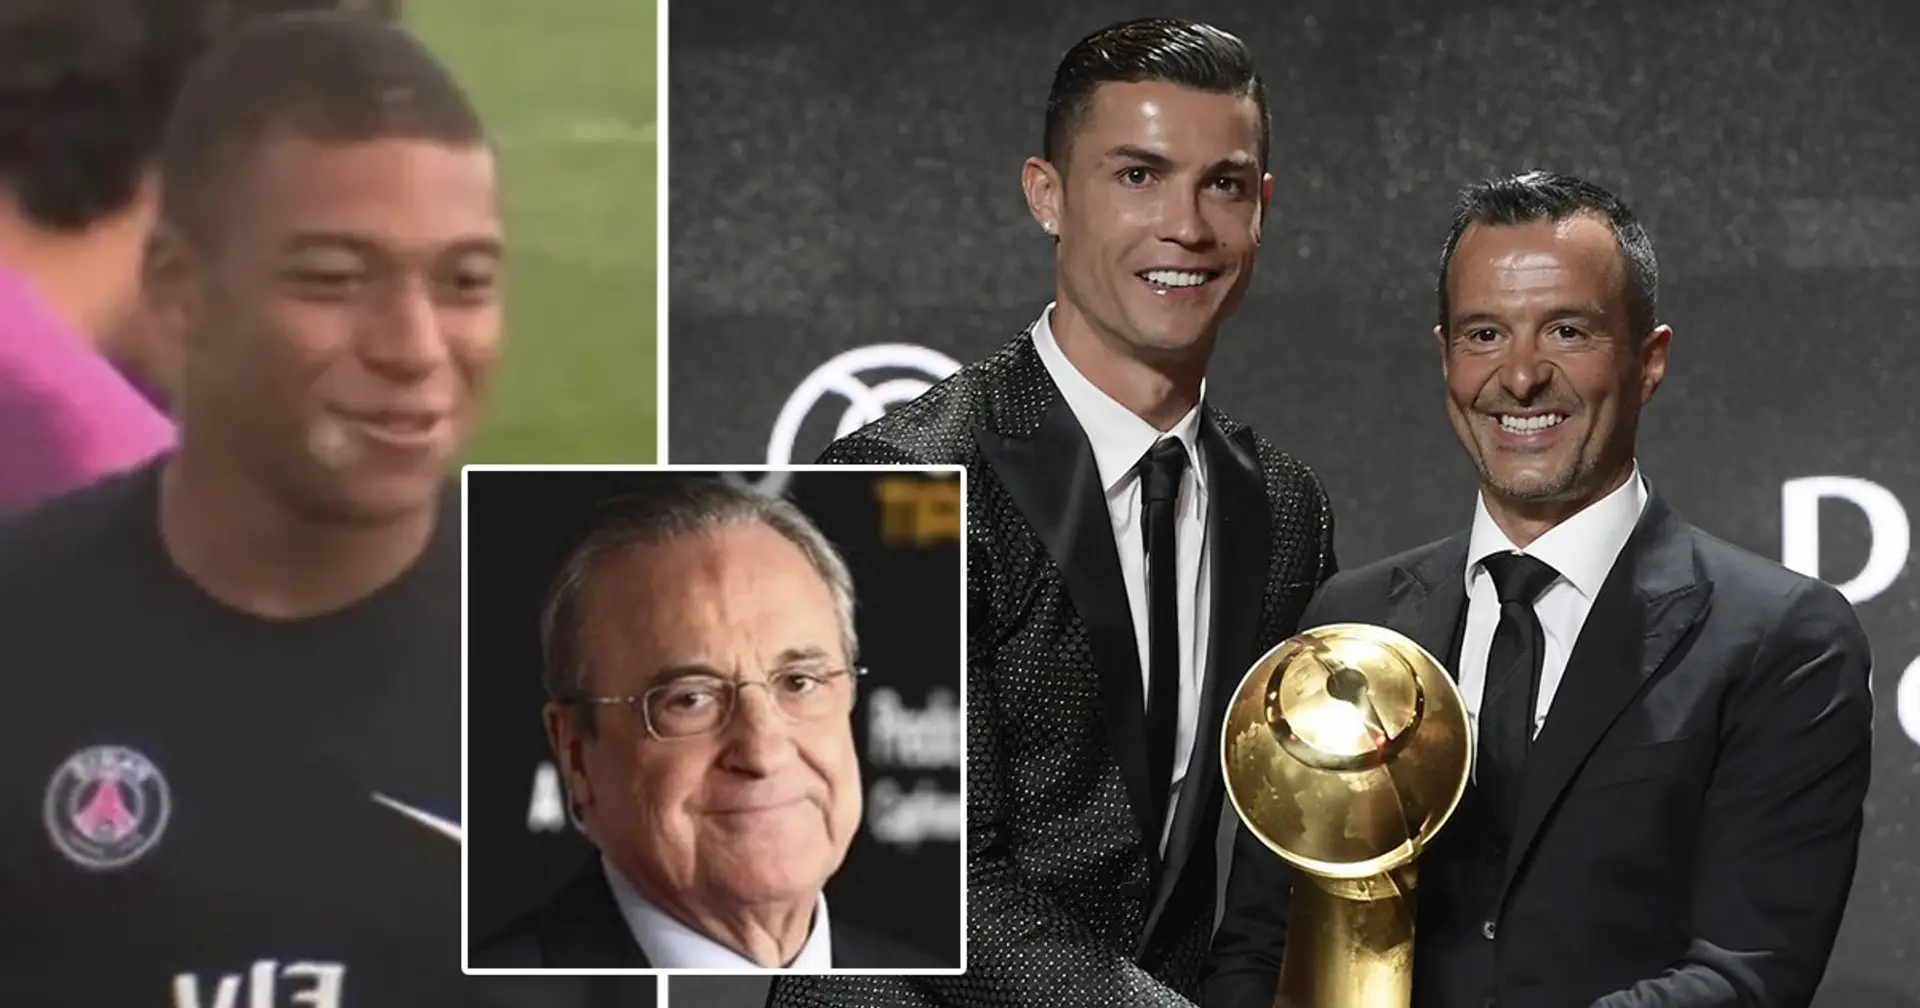 Revealed: 2 big football agents trying to 'unblock' Mbappe-to-Madrid move